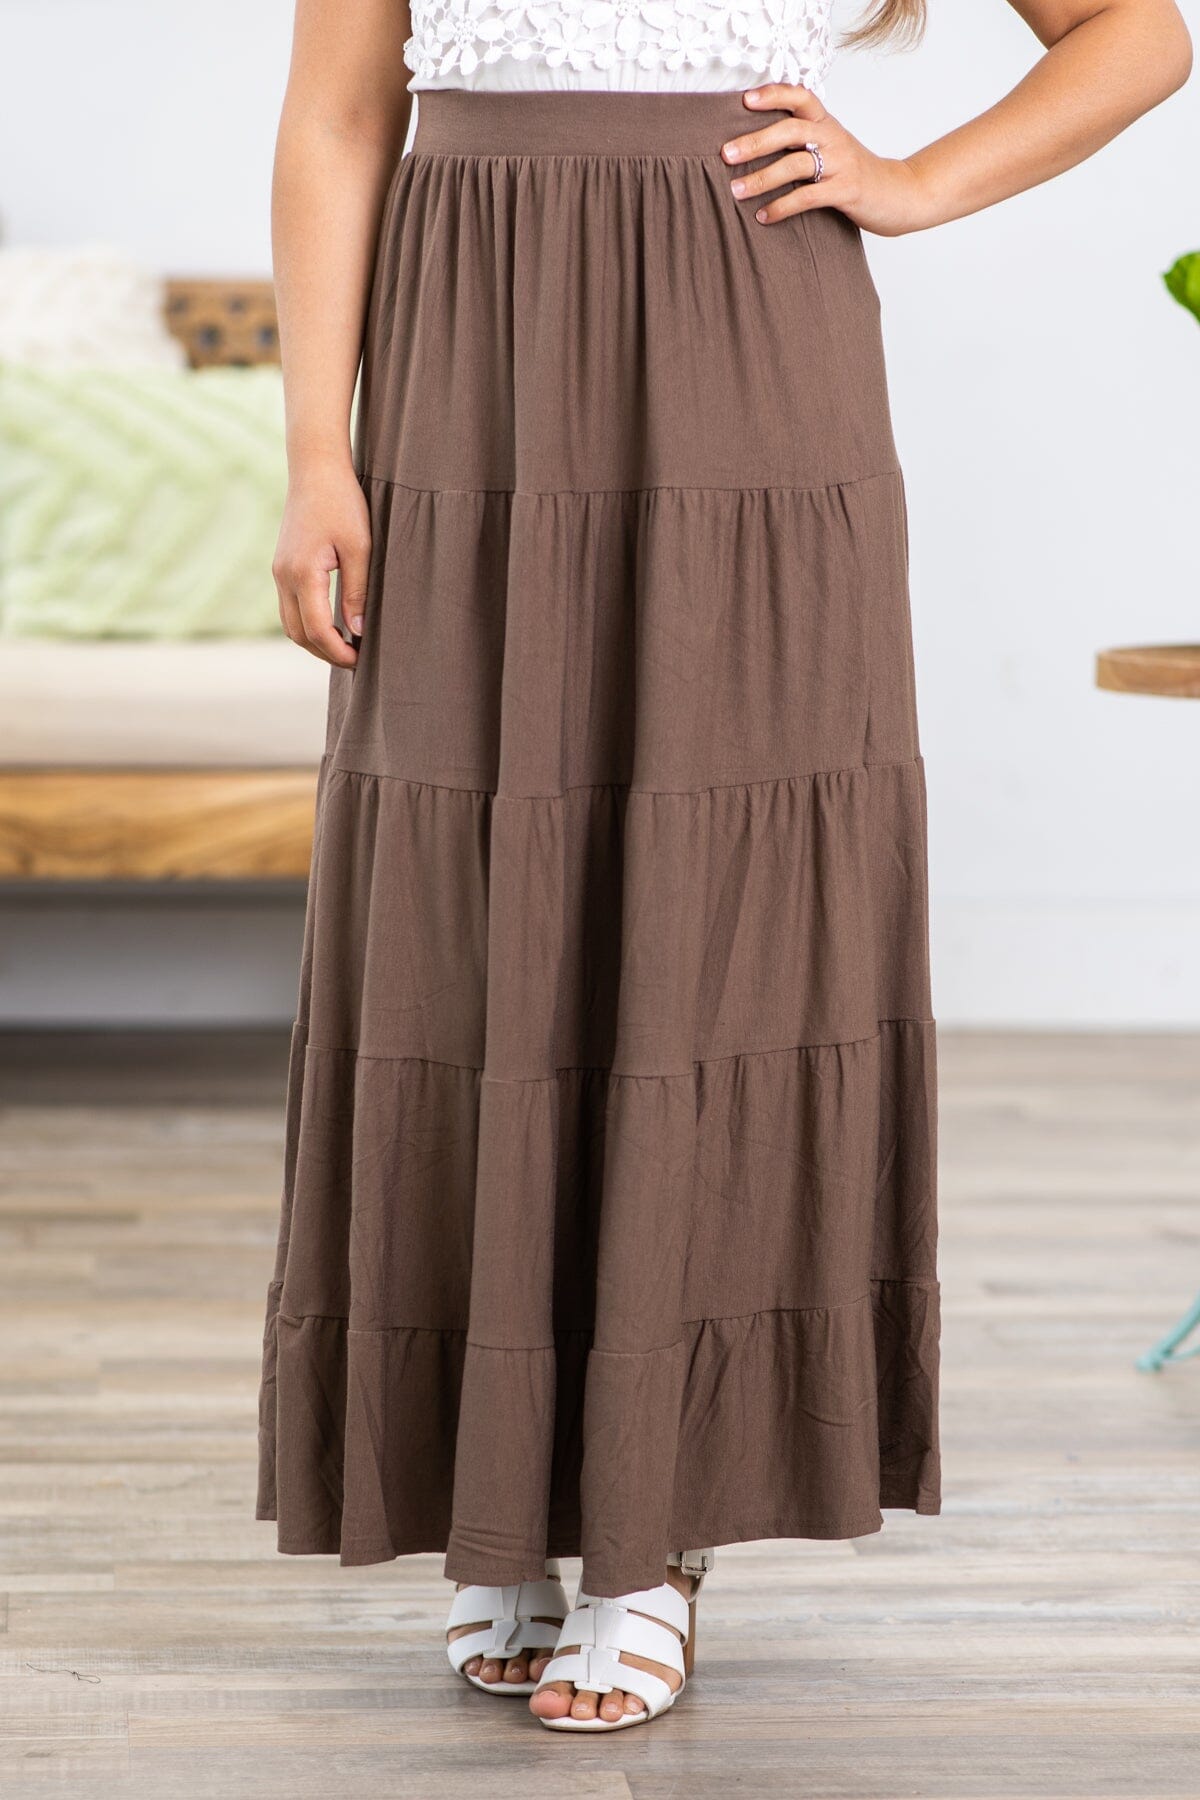 Mocha Tiered Pull On Maxi Skirt - Filly Flair